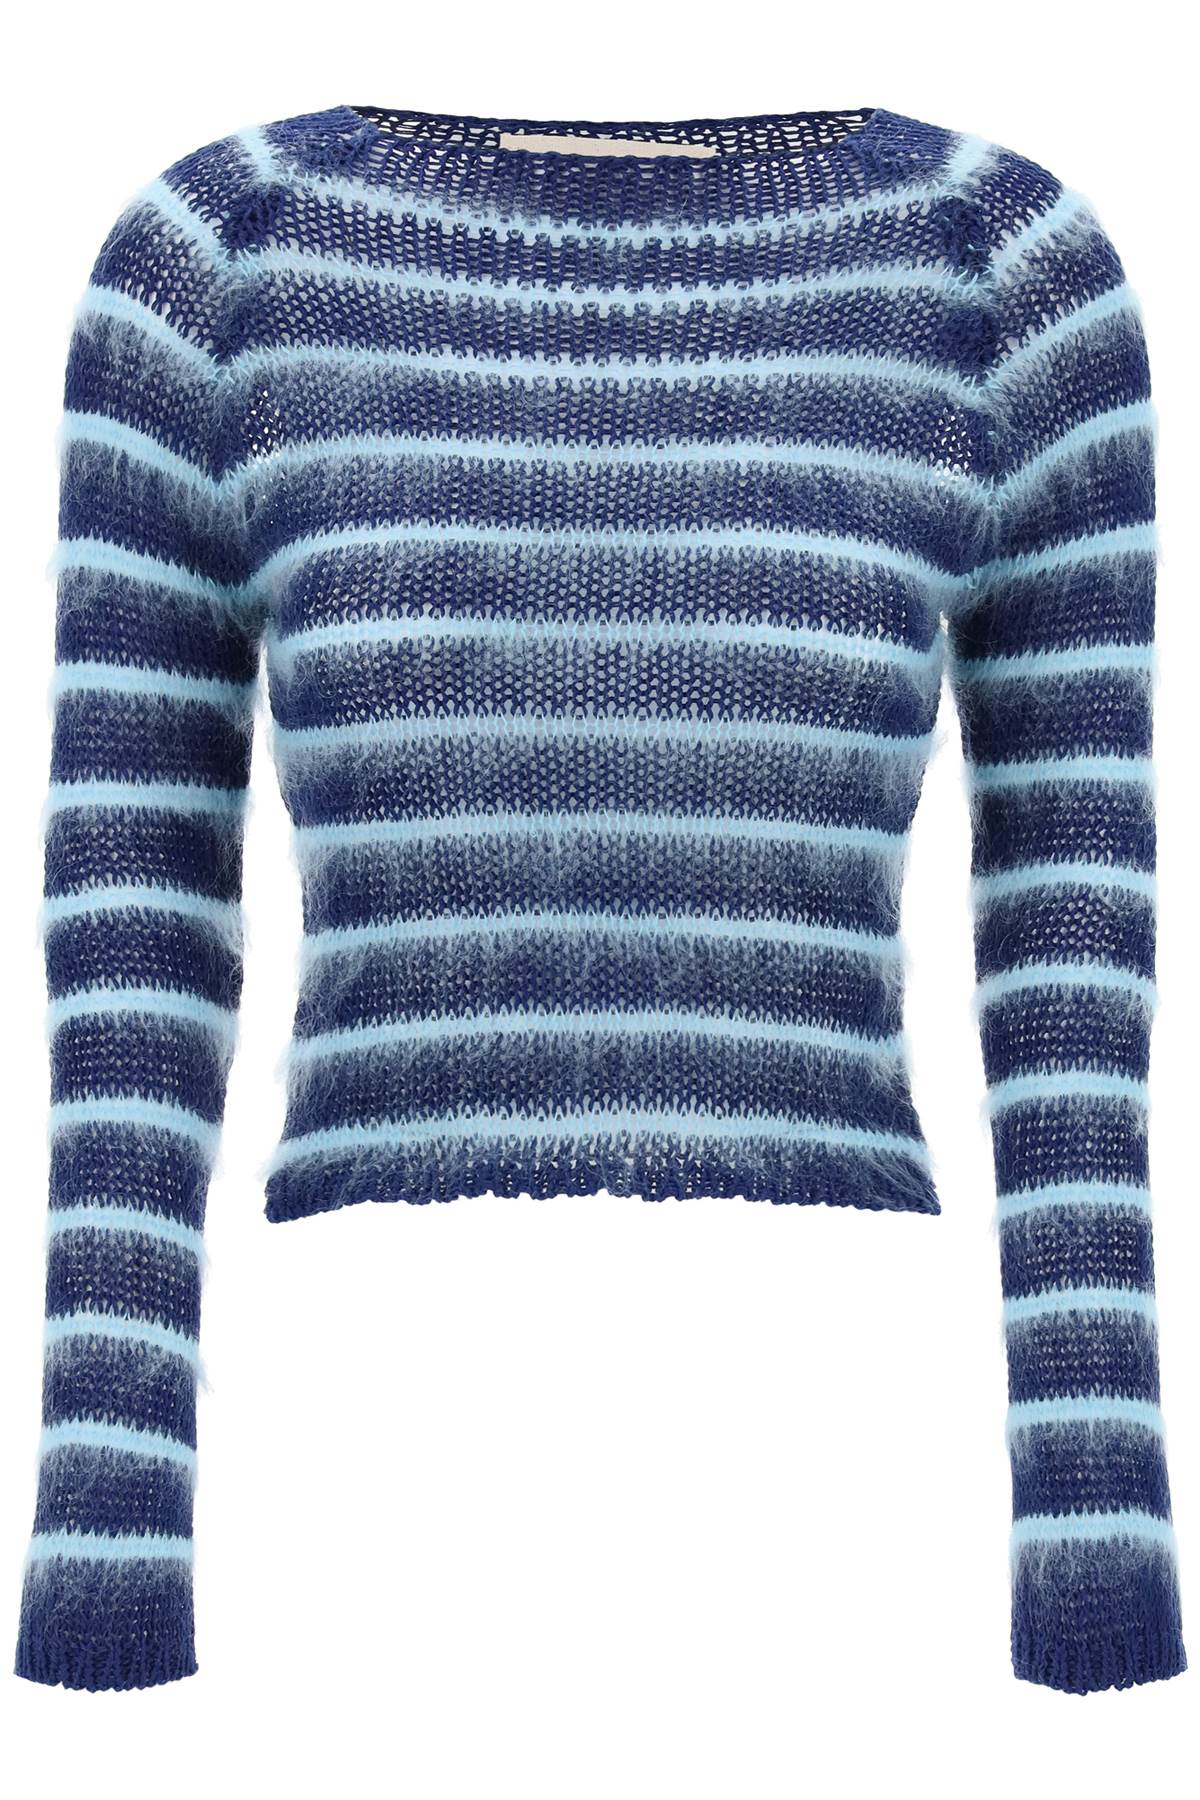 Marni striped cotton and mohair pullover-0